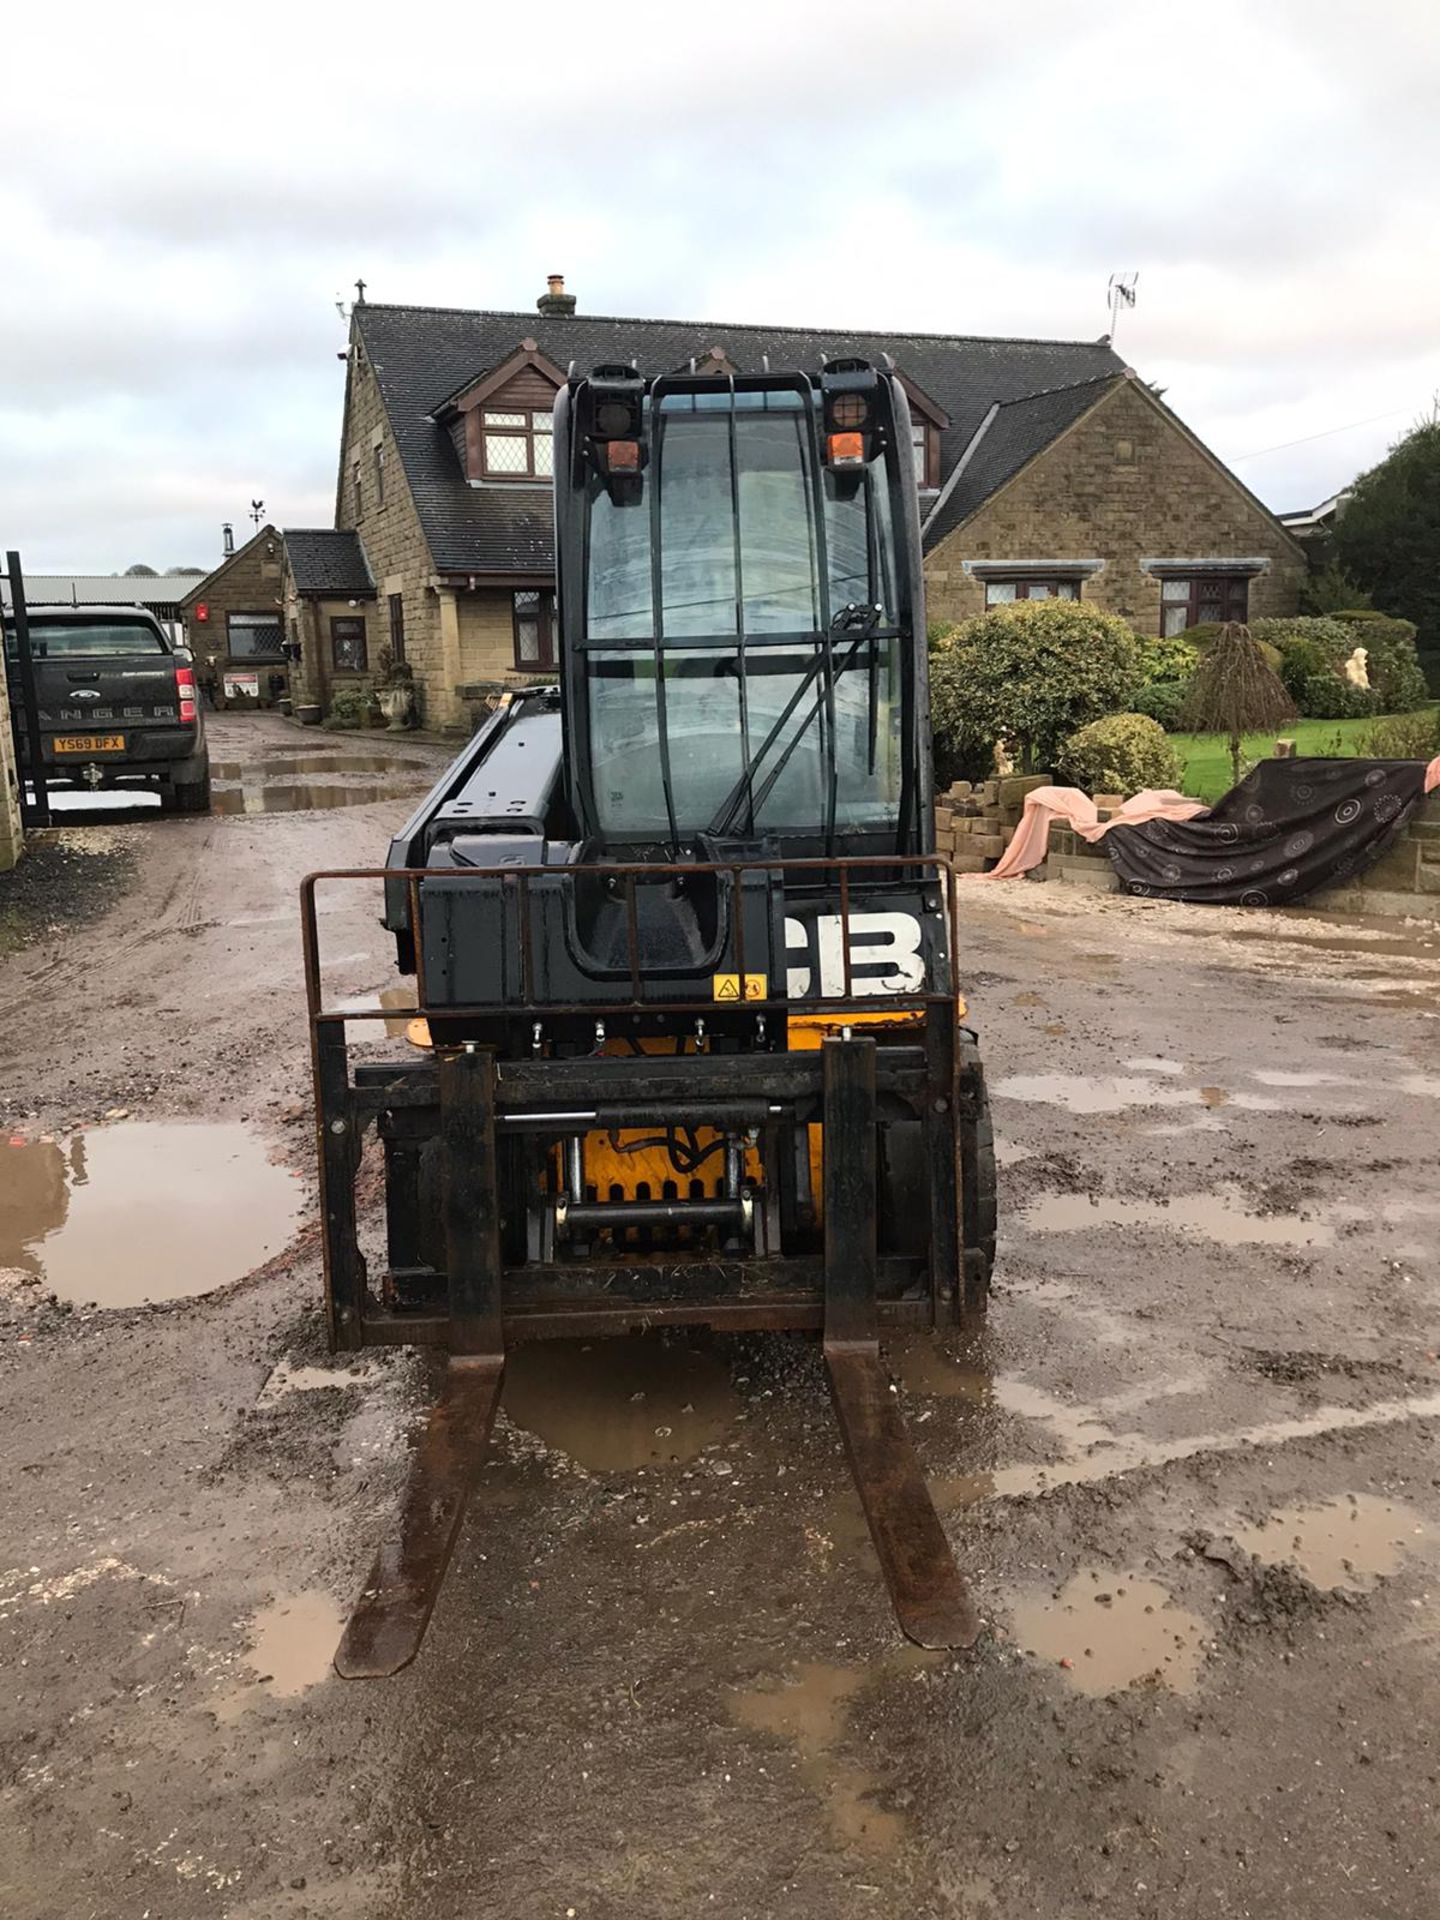 JCB TLT 30 TELETRUK, YEAR 2014, POWER 35.6 KW, WEIGHT 4900 KG, RUNS, WORKS AND LIFTS *PLUS VAT* - Image 3 of 6